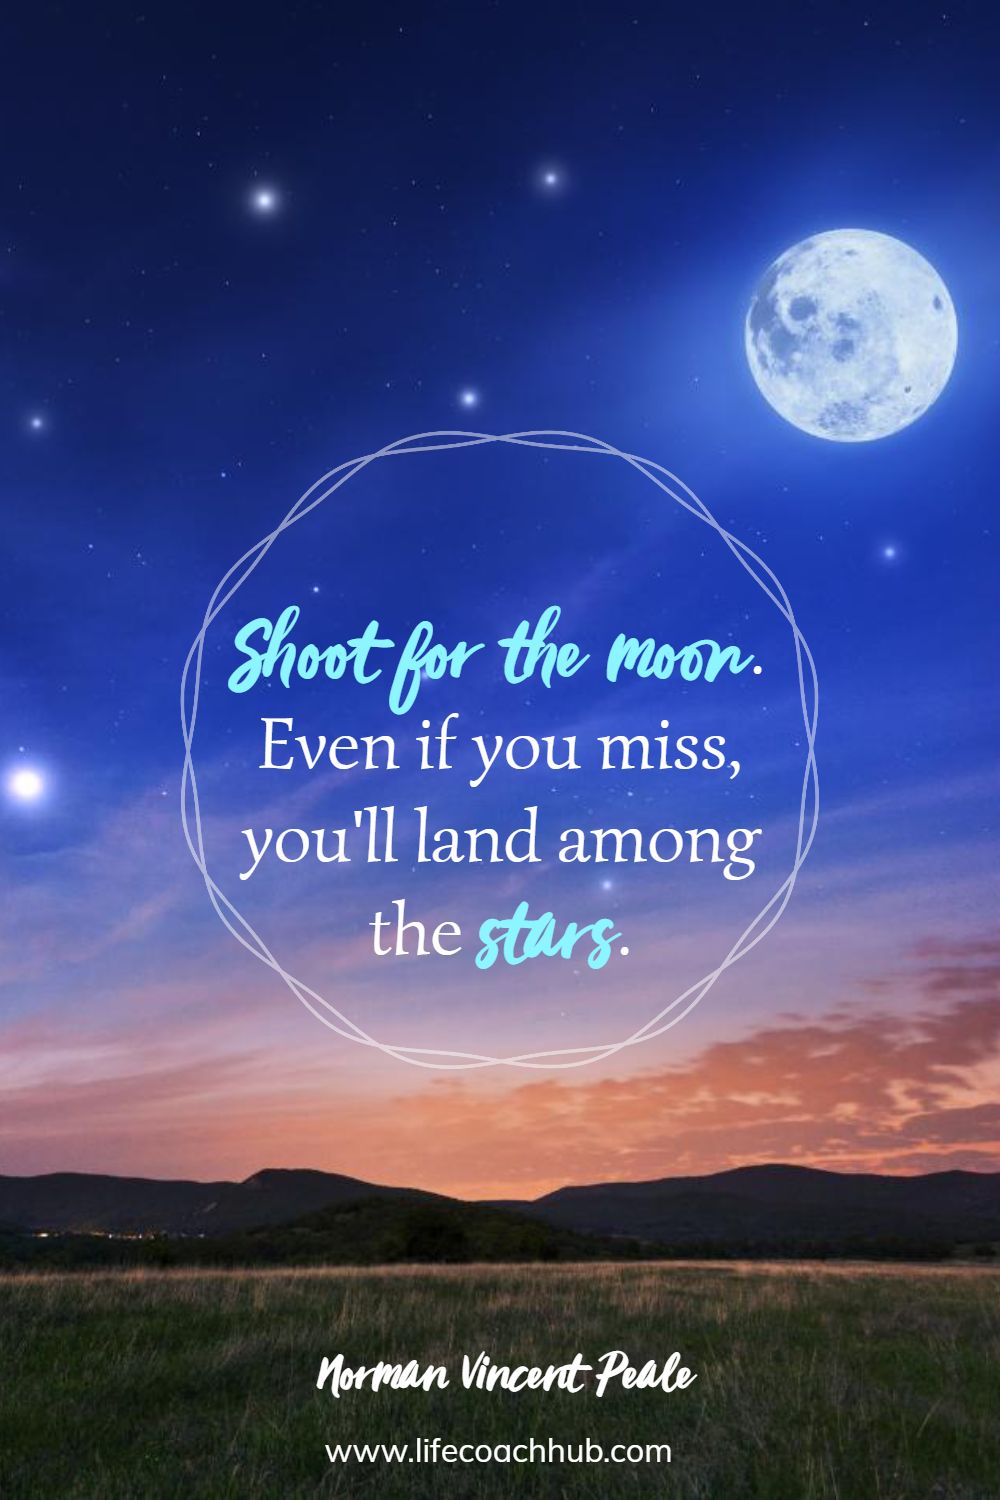 Shoot for the moon. Even if you miss, you'll land among the stars. Norman Vincent Peale Coaching Quote